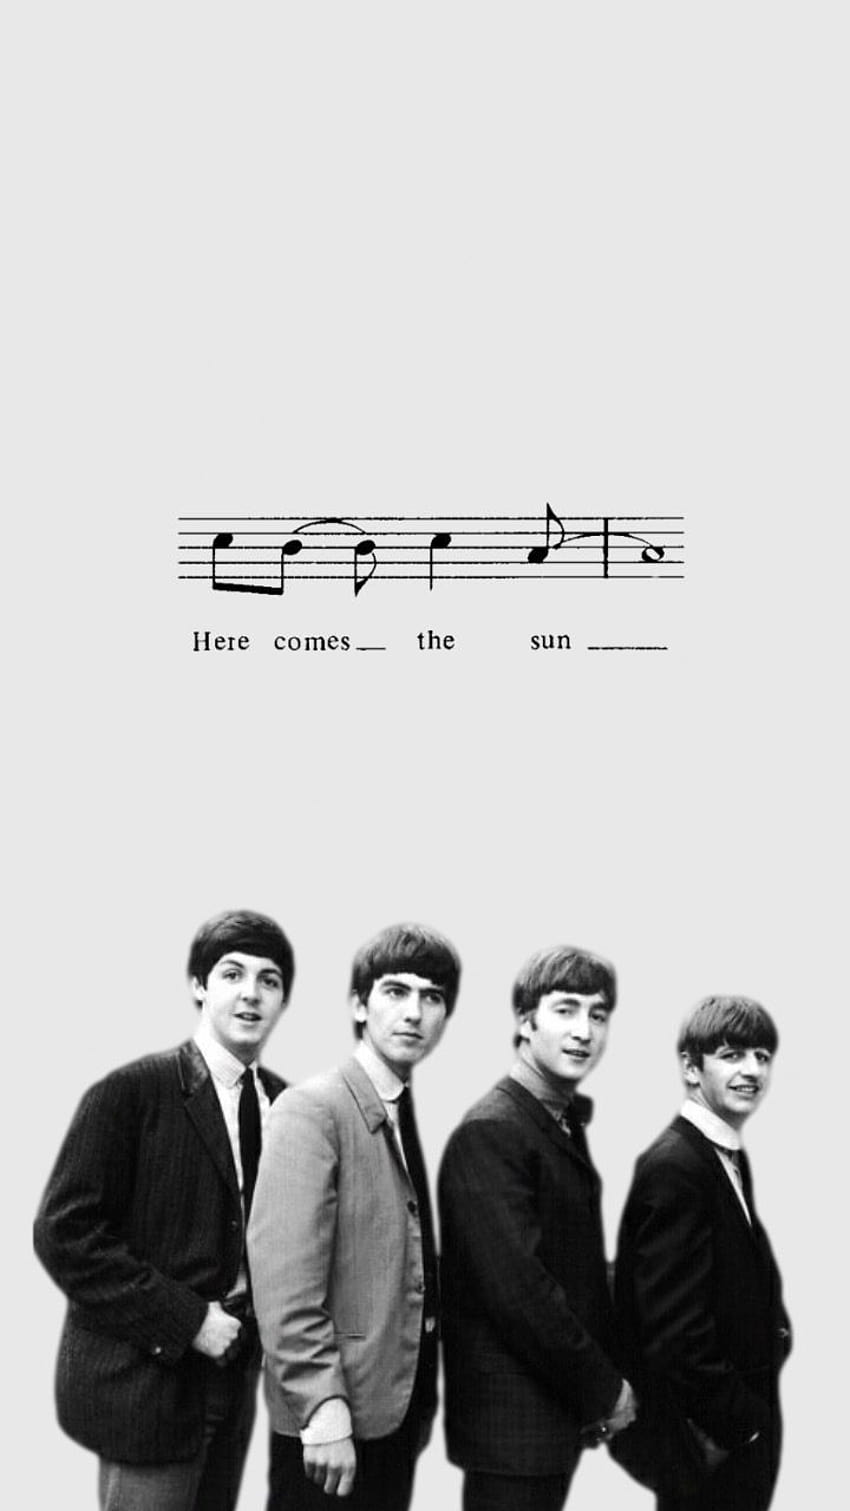 Day 2 of beatles wallpapers today With The Beatles  rTheBeatles